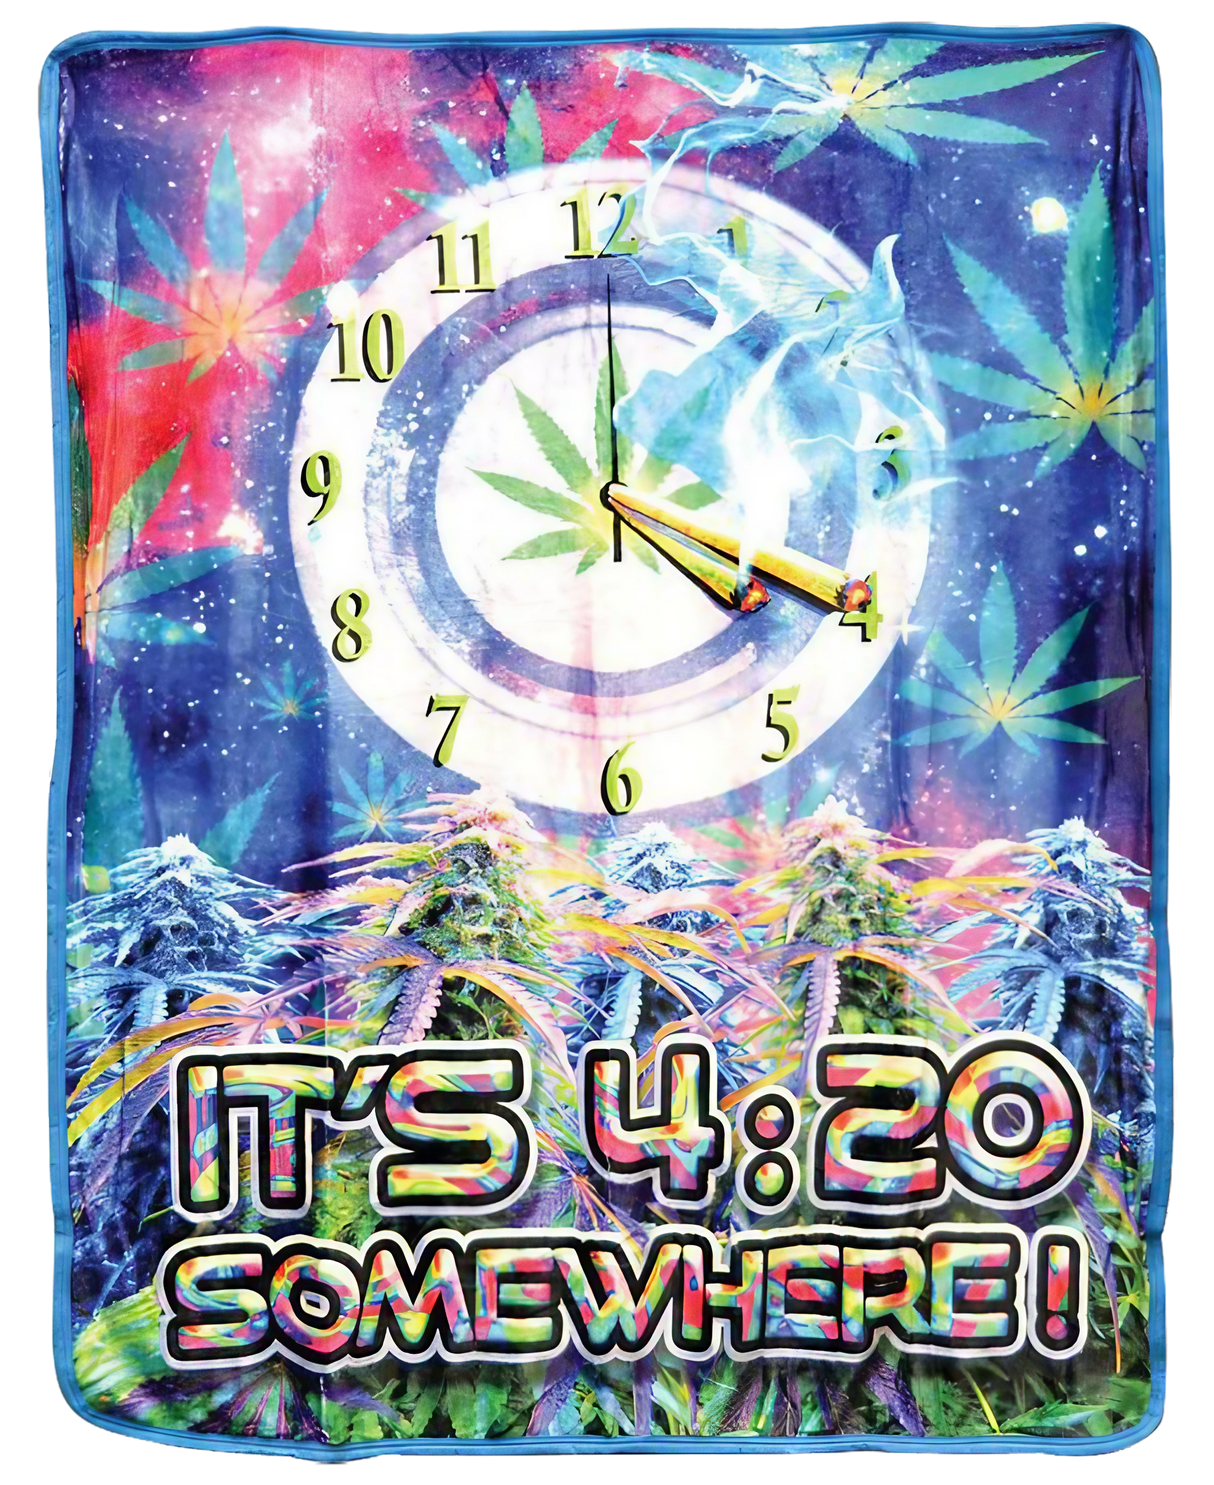 Colorful 'It's 4:20 Somewhere' fleece blanket with psychedelic design, 50" x 60", by Nu Trendz.